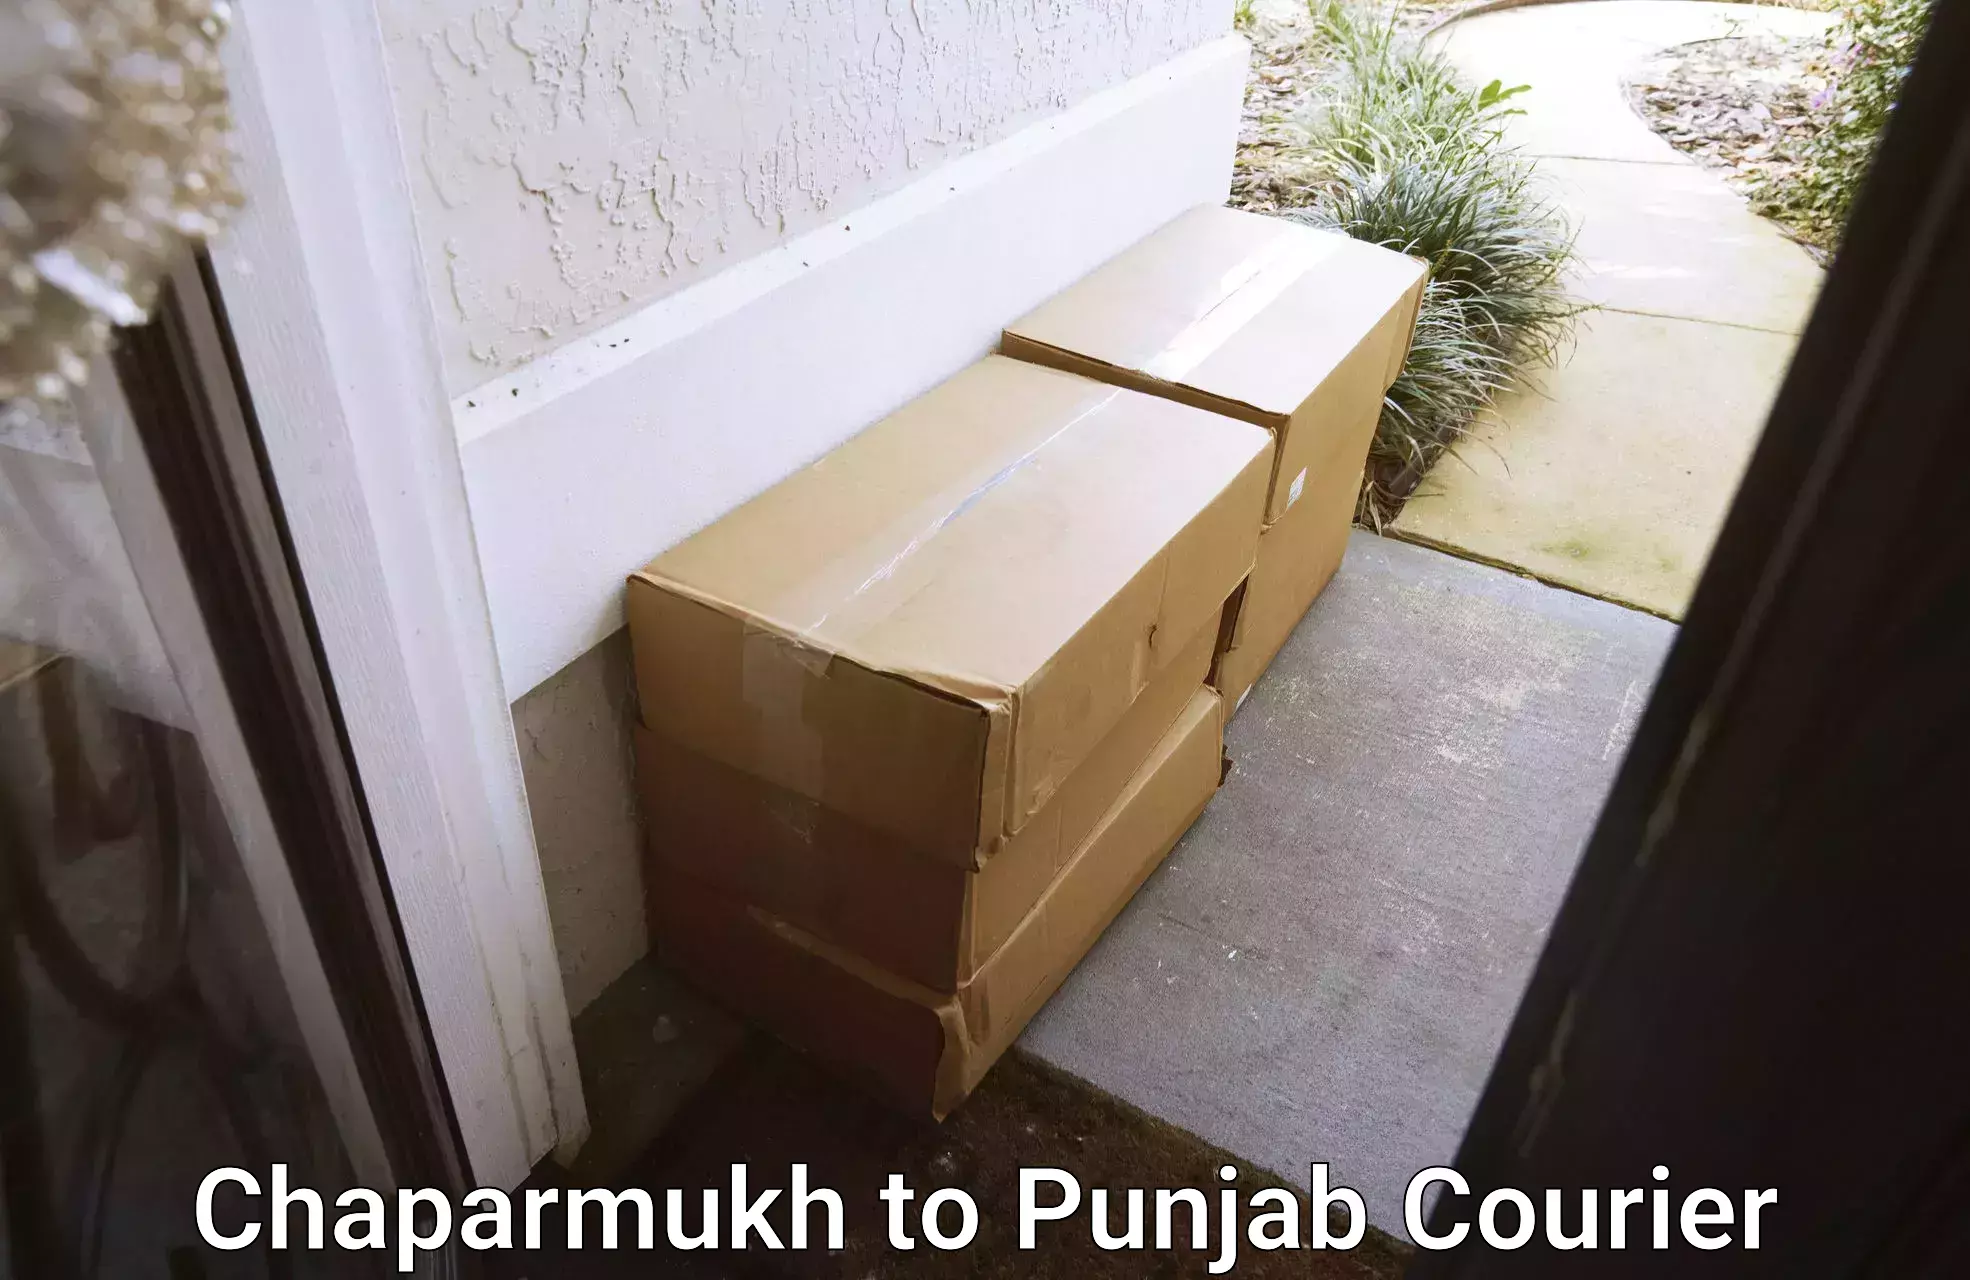 Multi-service courier options Chaparmukh to Ajnala